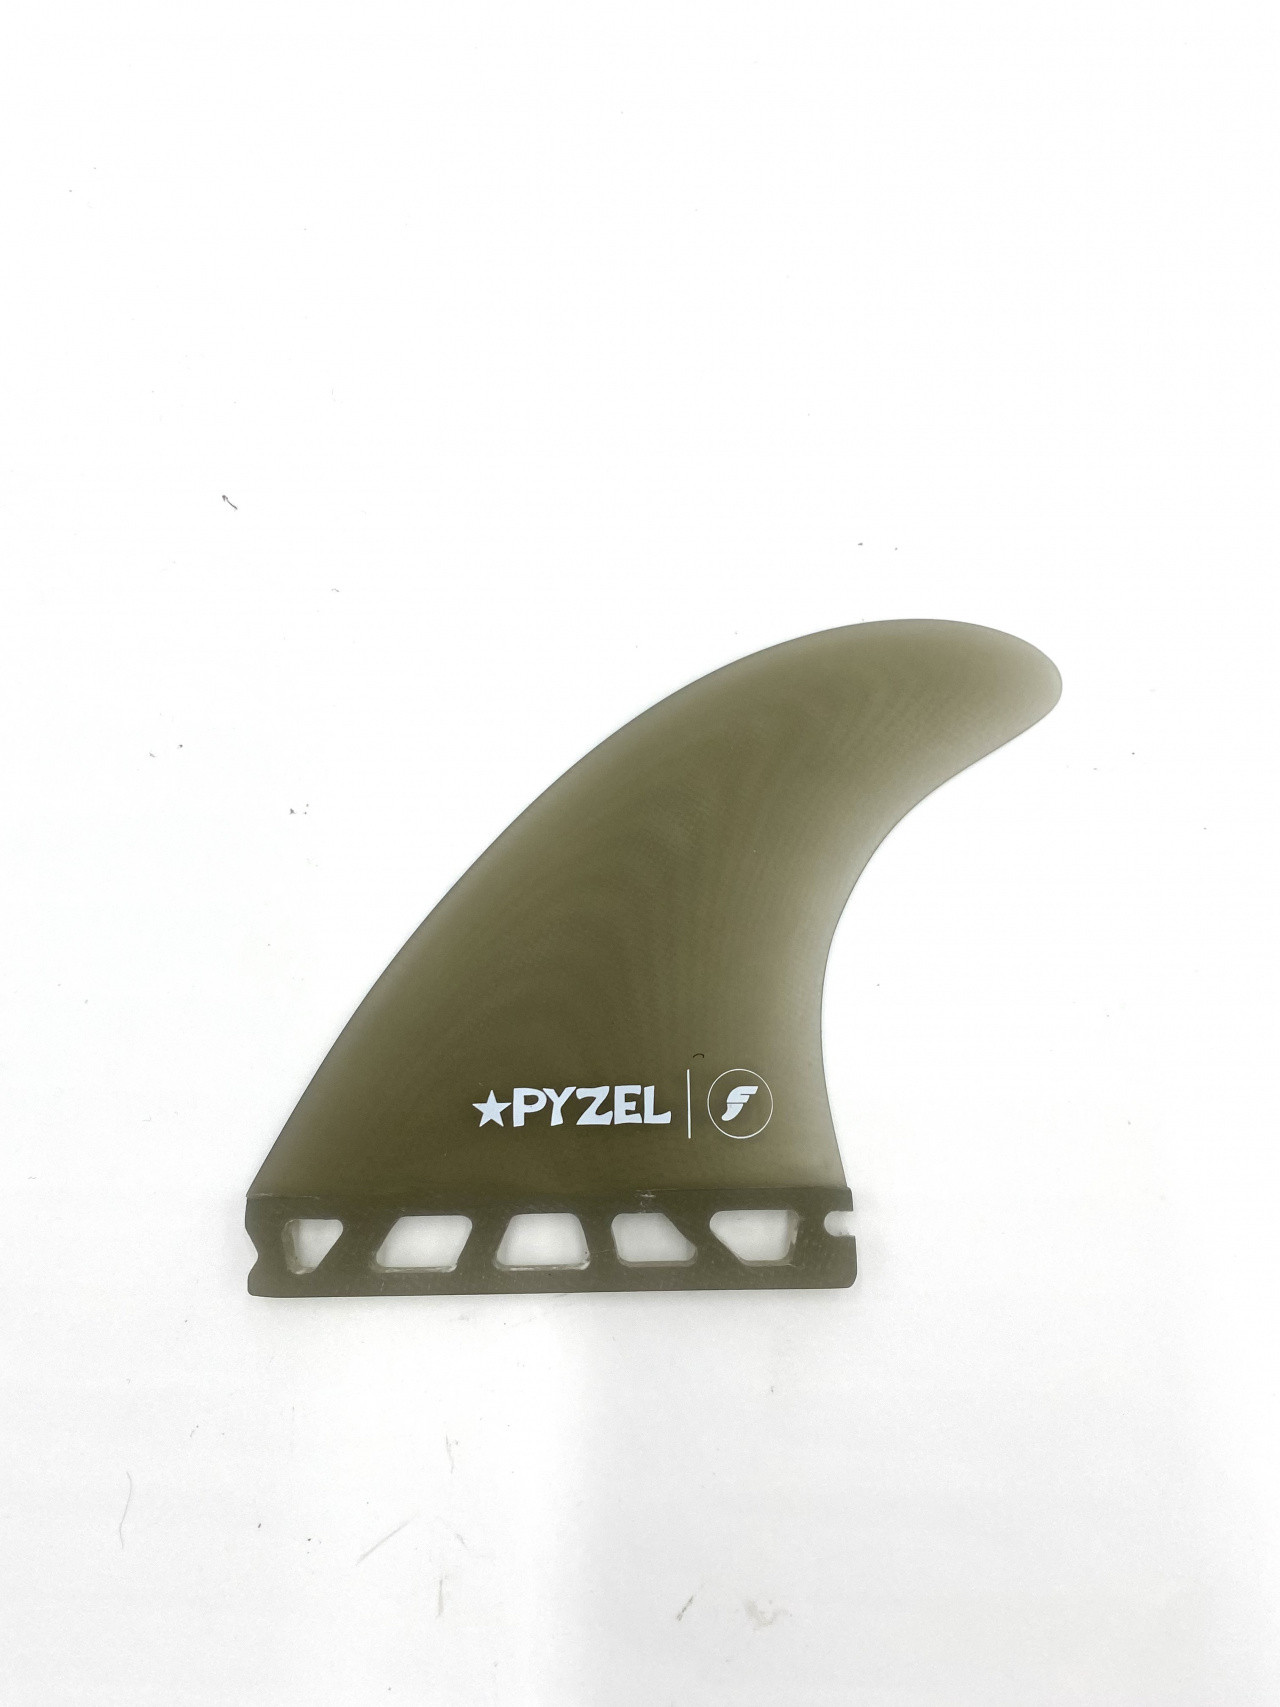 Pyzel Surfboards - Futures Pyzel Thruster Fins